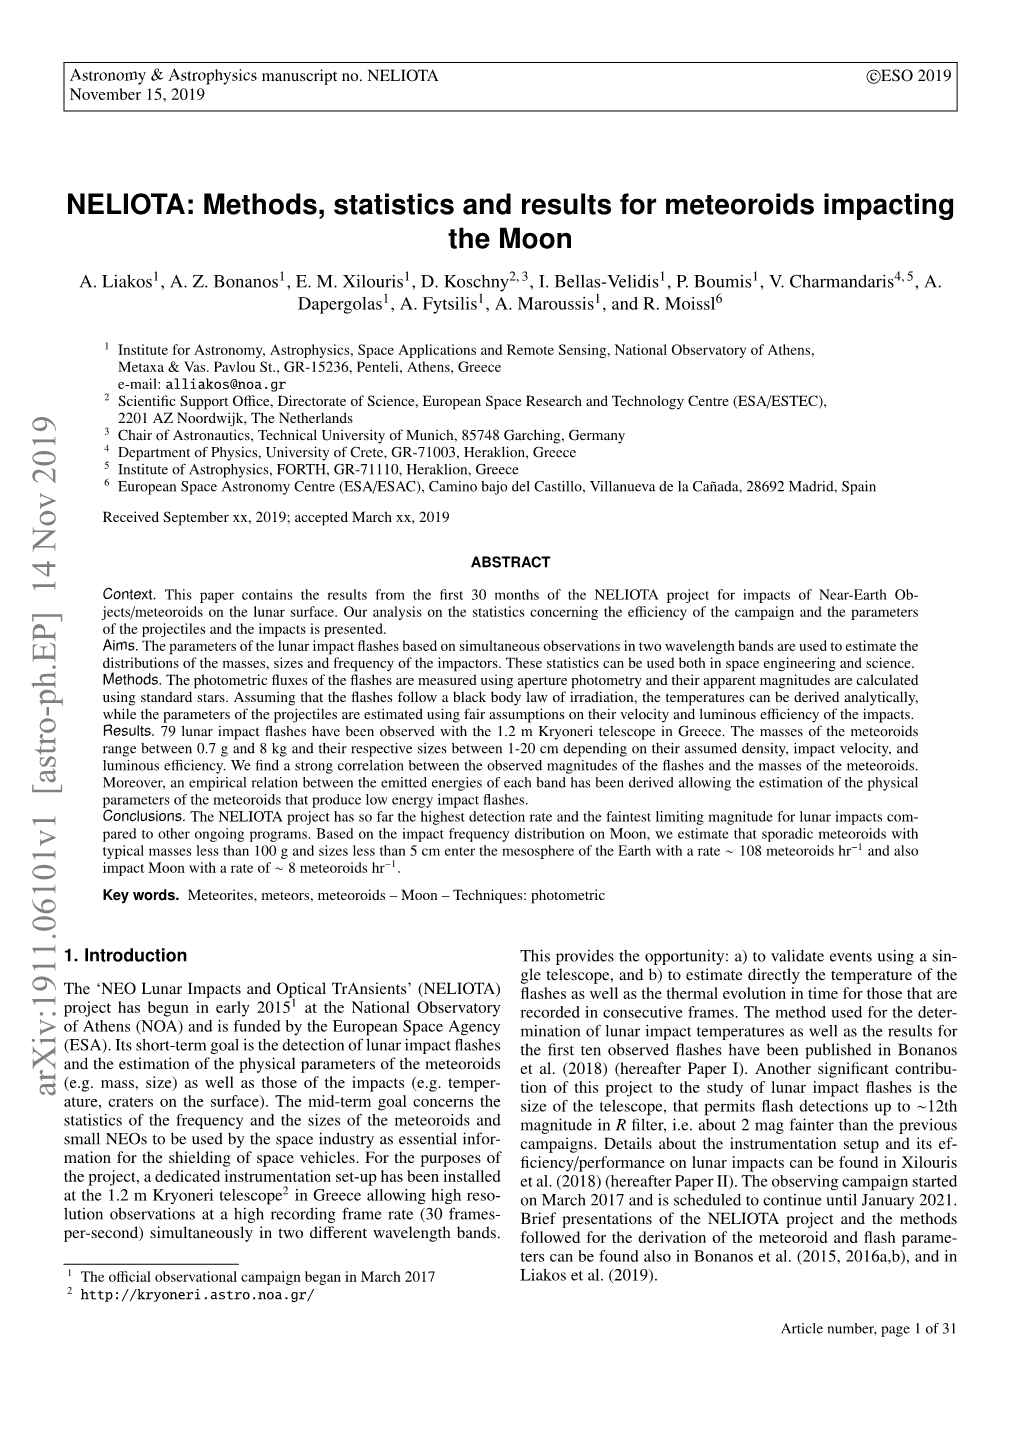 NELIOTA: Methods, Statistics and Results for Meteoroids Impacting the Moon A